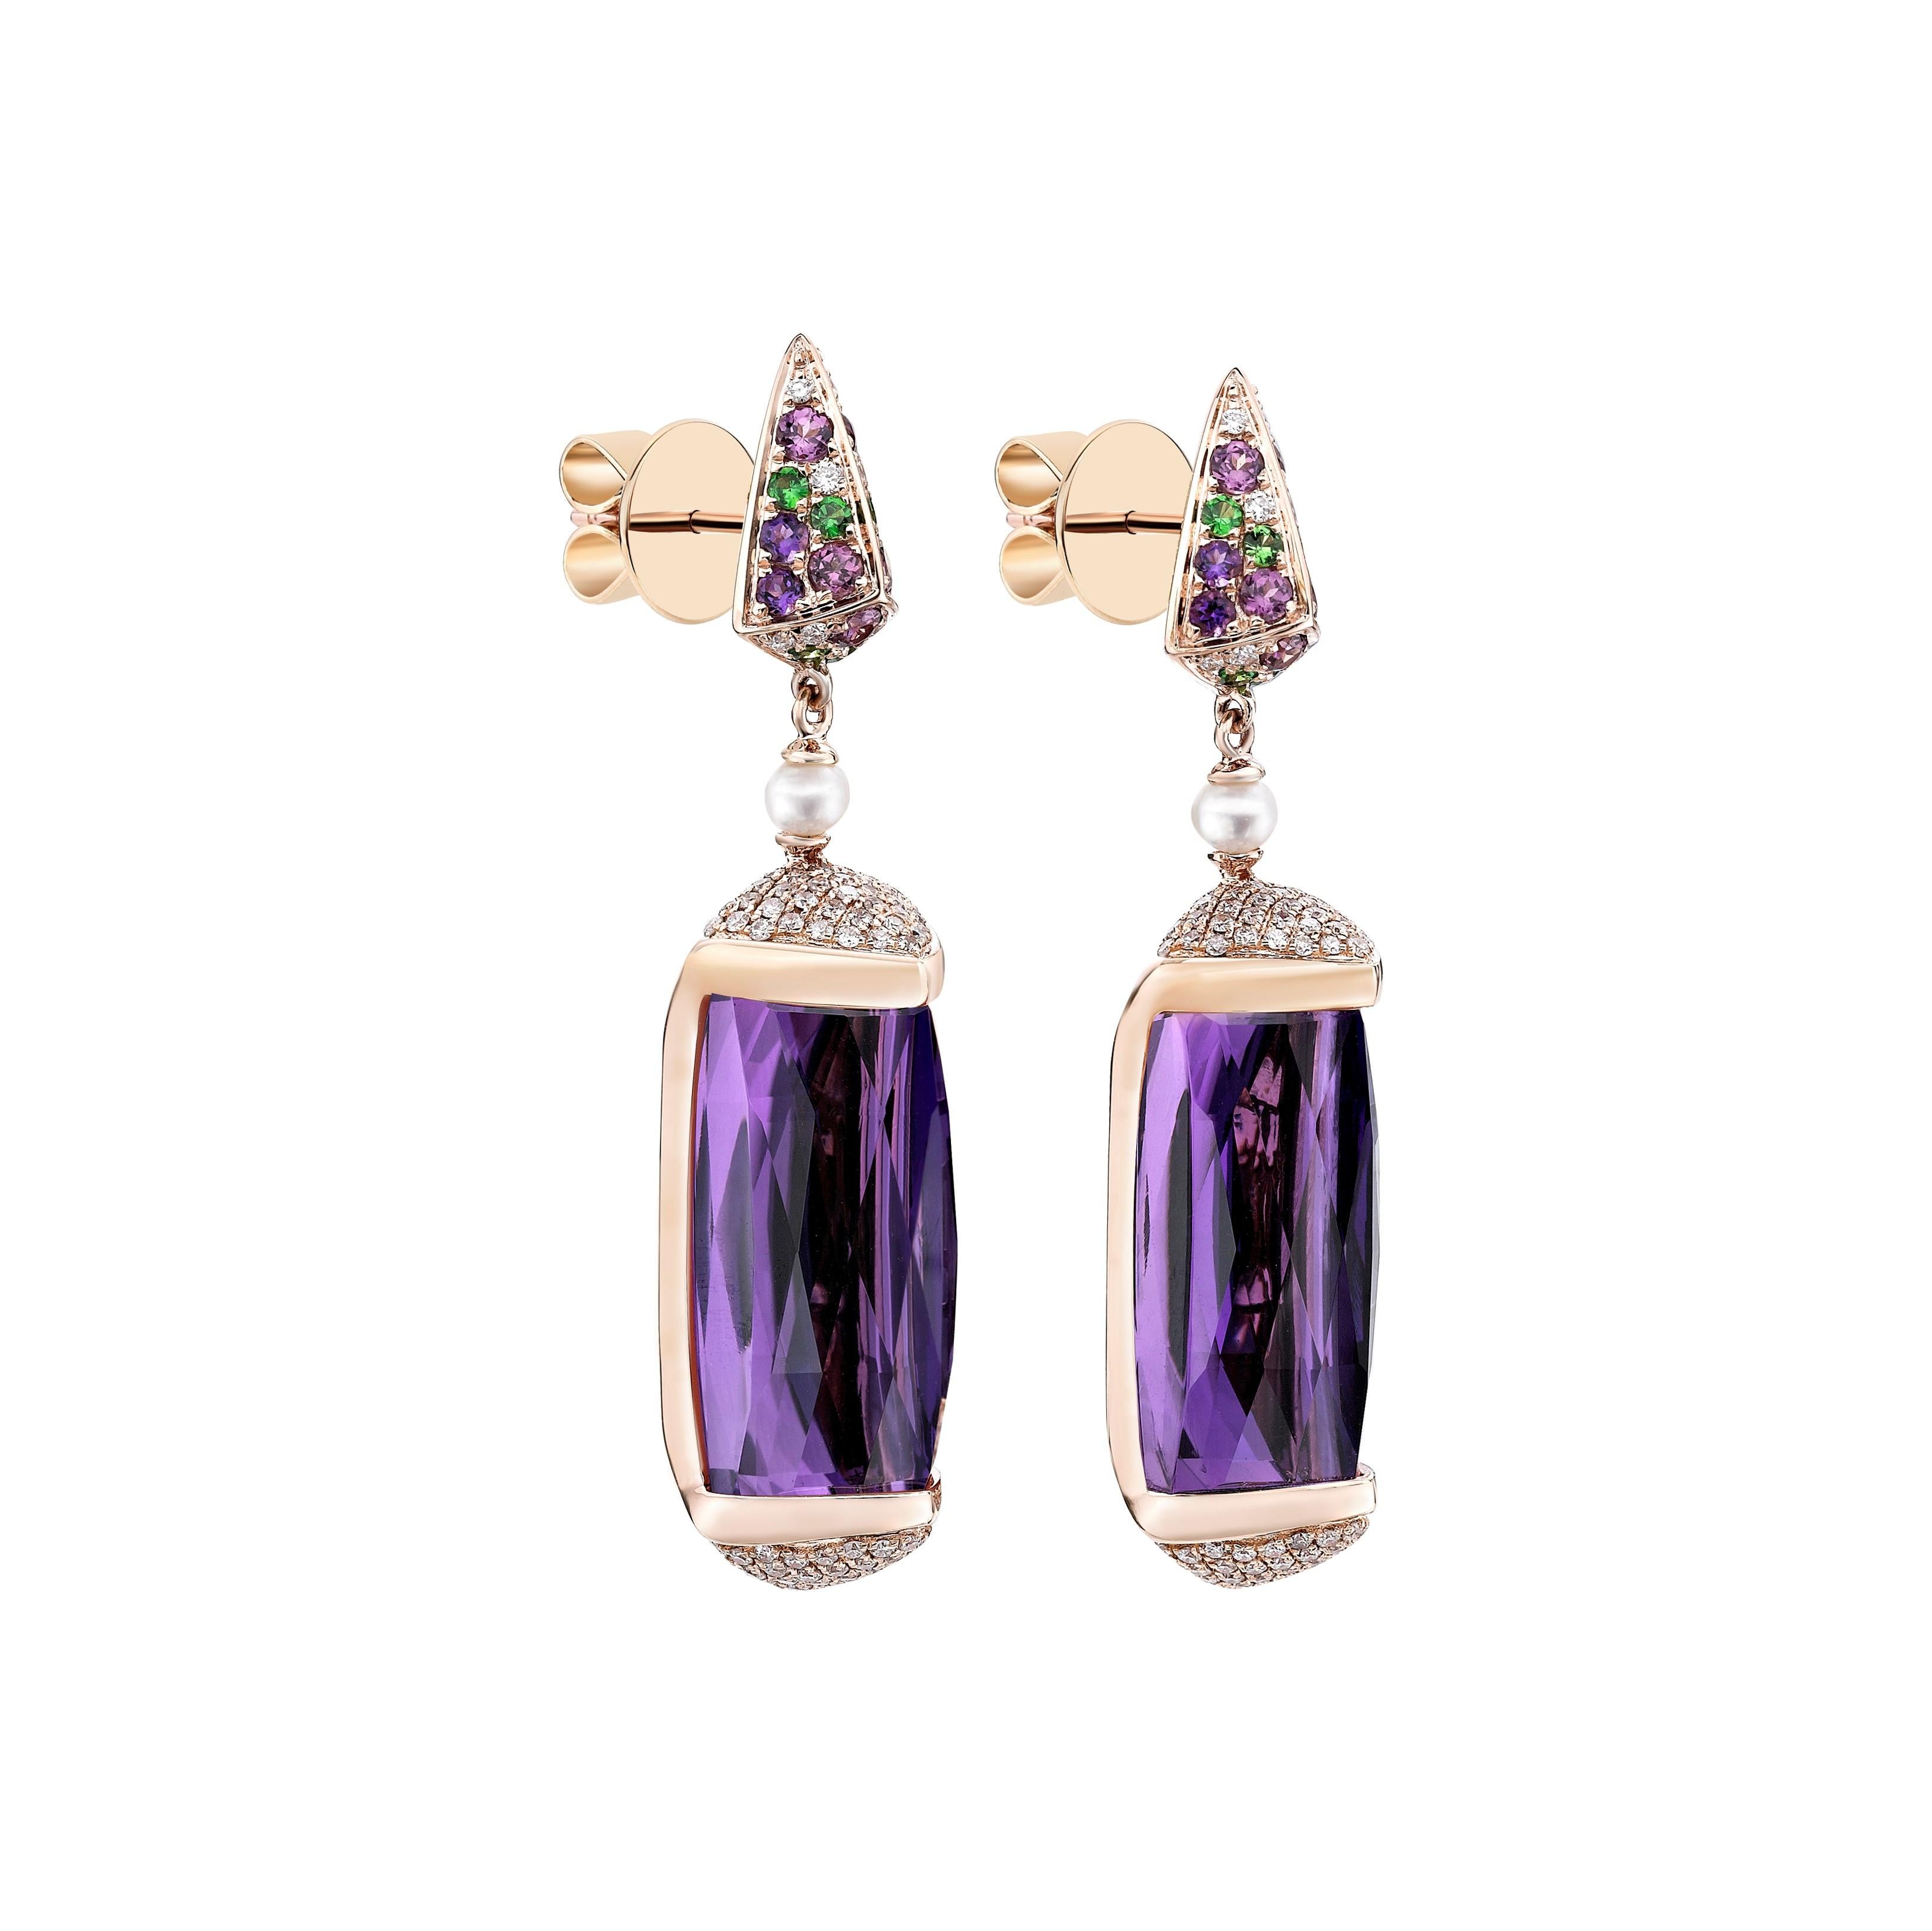 46 Carat Amethyst and Diamond Ring and Earring Set in 18 Karat Rose Gold For Sale 2